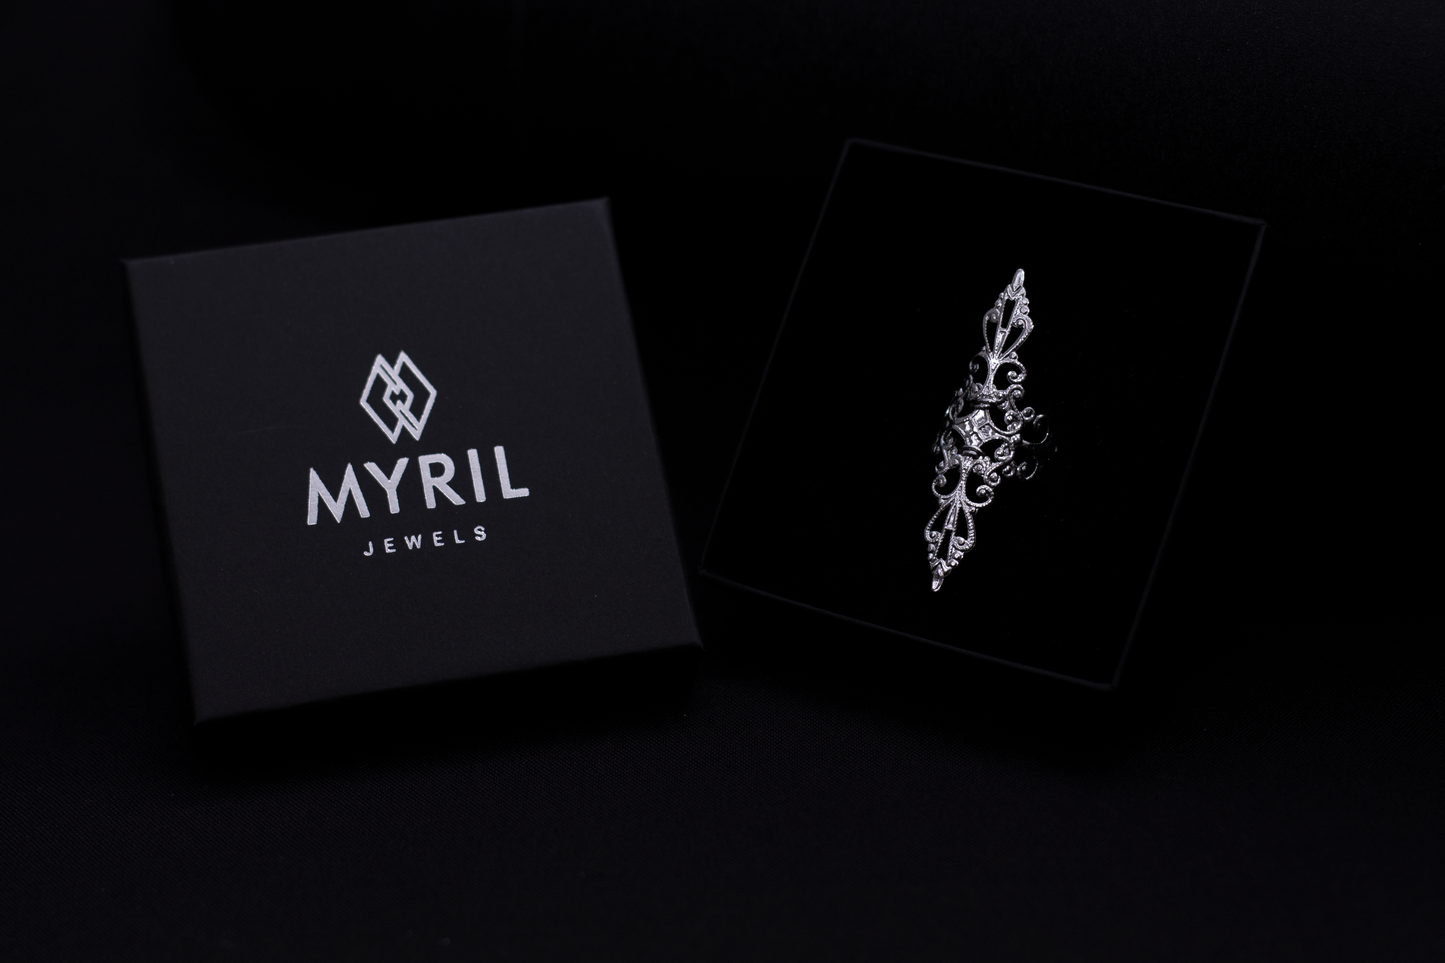 A sleek Myril Jewels branded box open on a dark surface, revealing a sophisticated silver filigree ring inside, showcasing the brand's refined gothic jewelry collection.